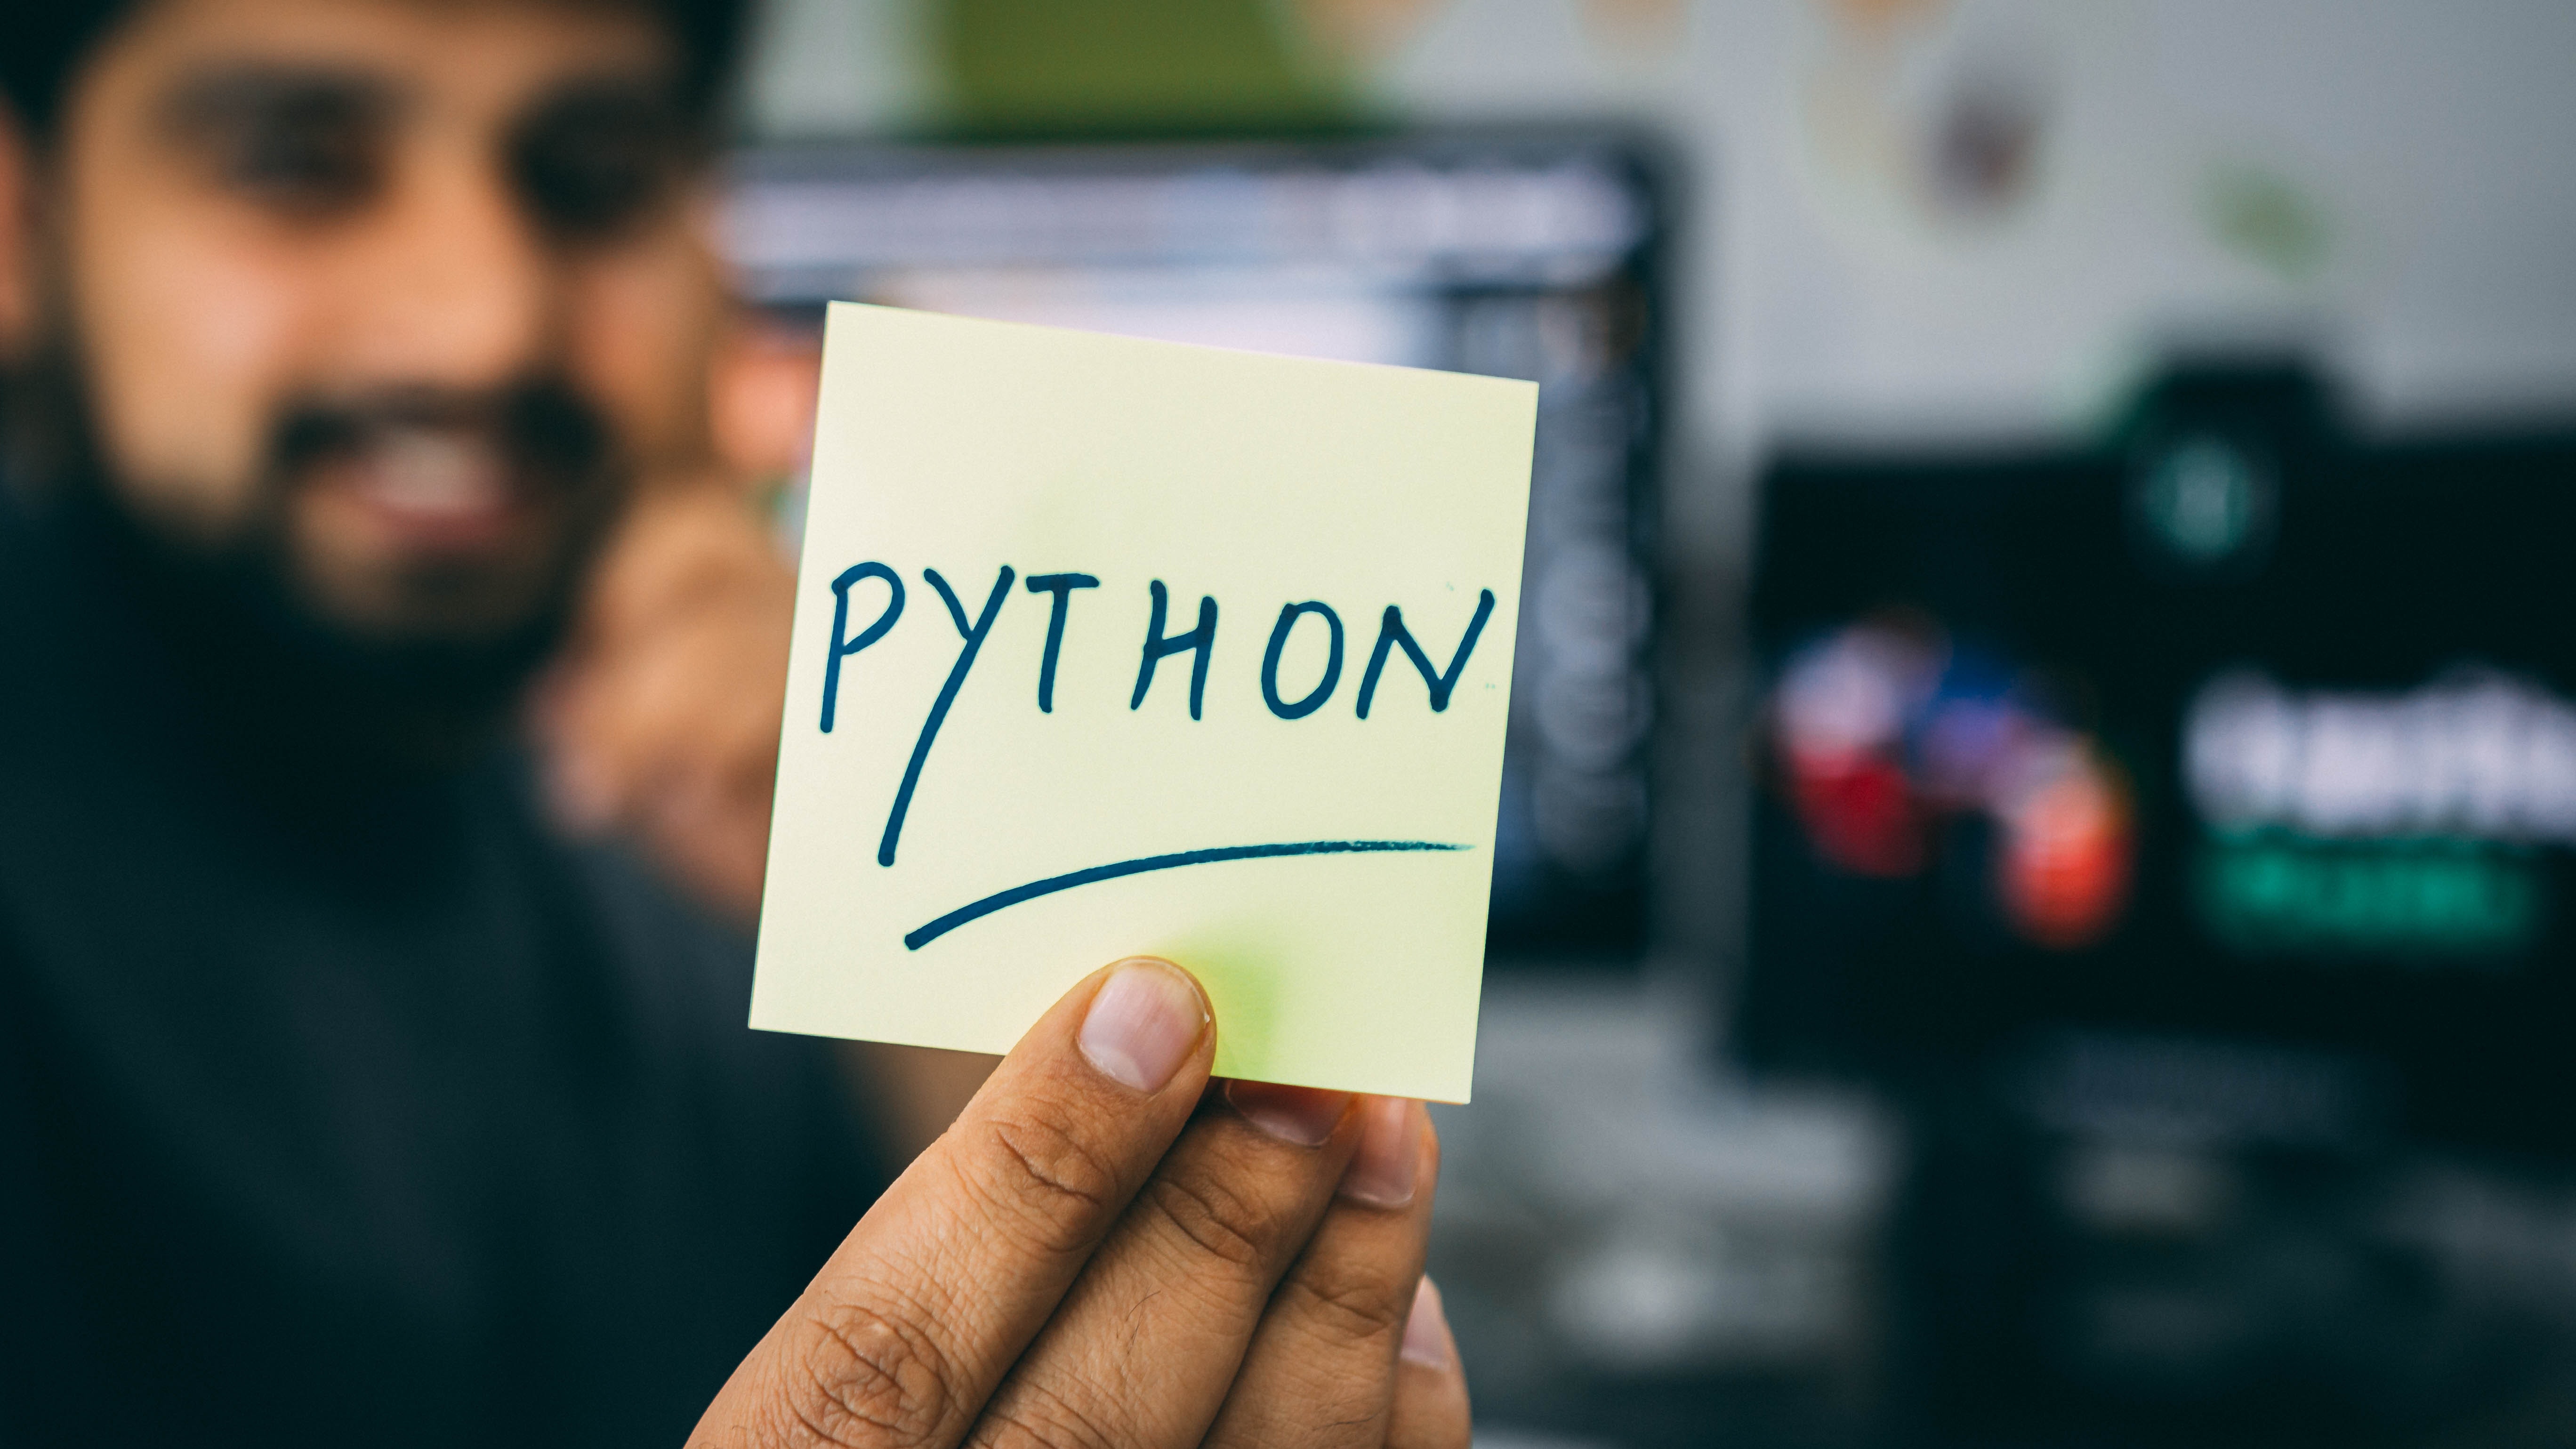 What Do You Use Python For?